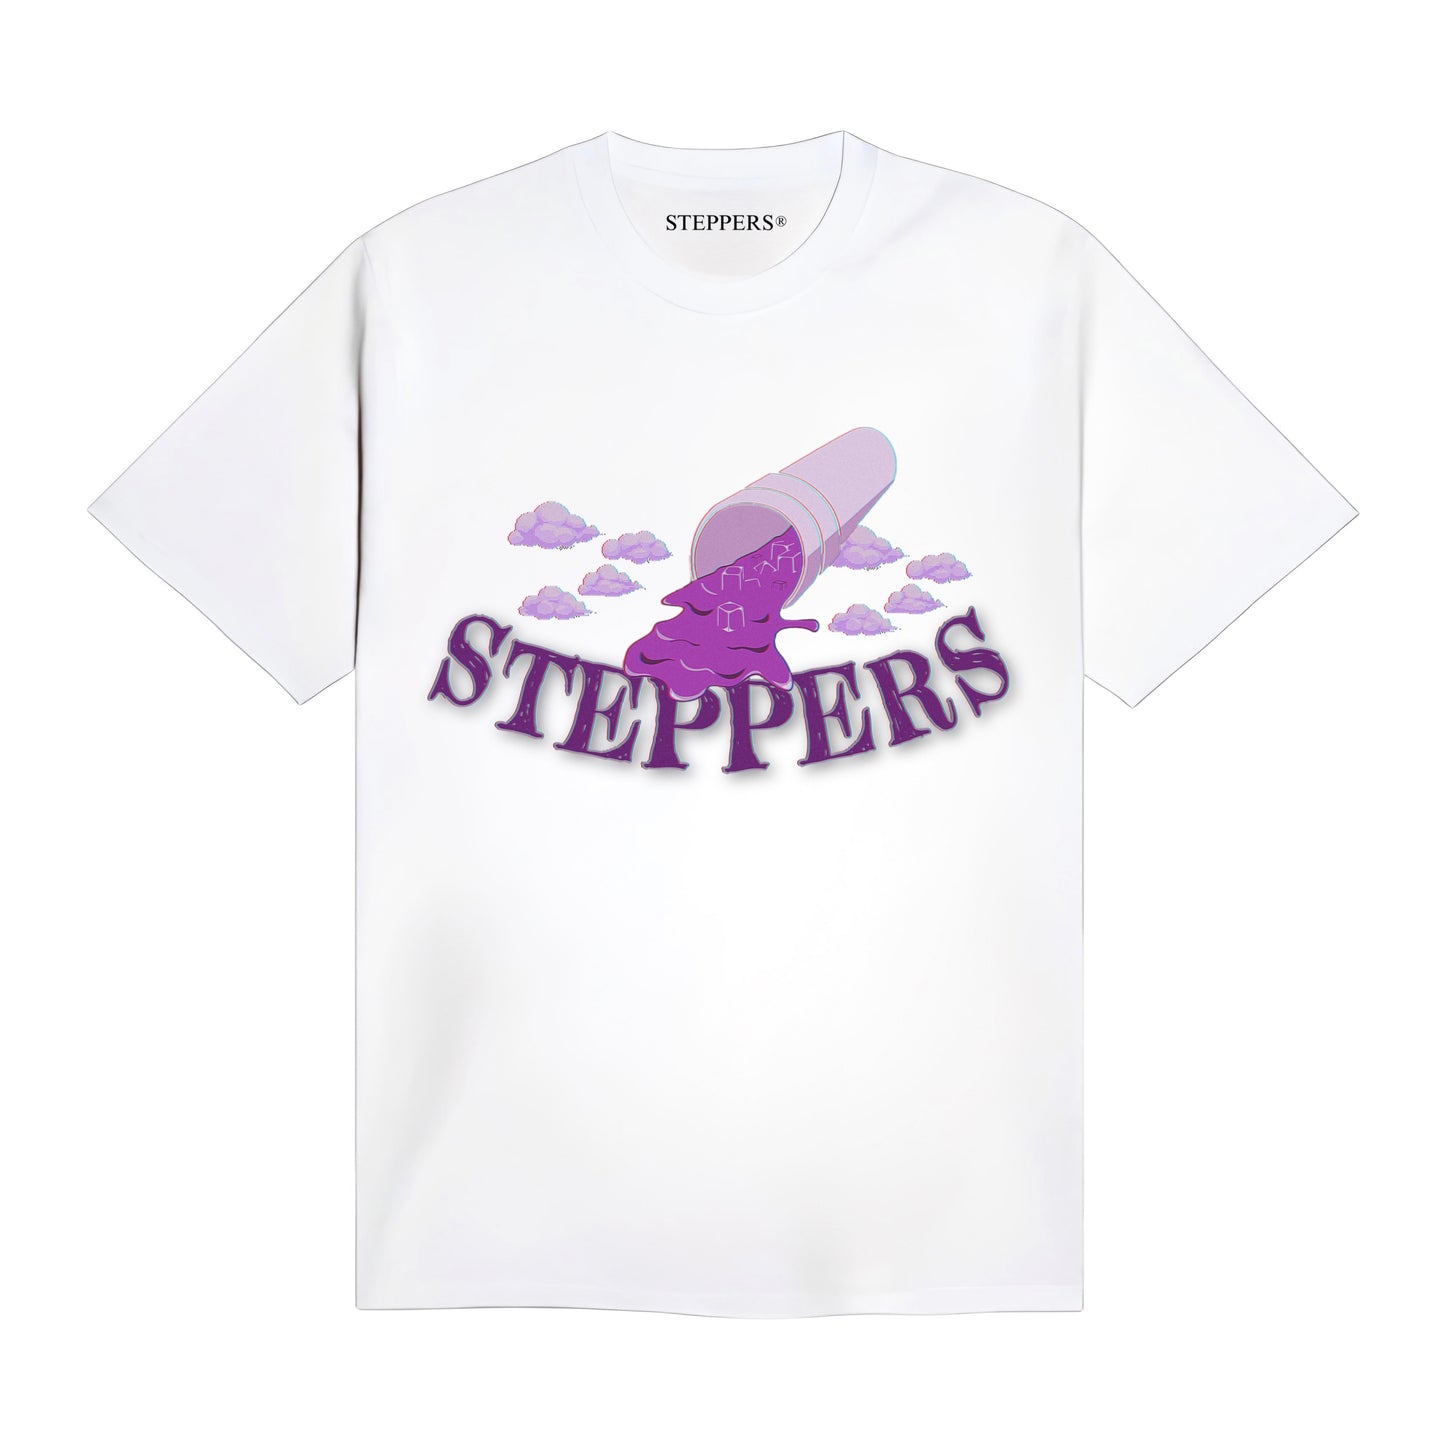 STEPPERS "SYRUP EDITION" WHITE